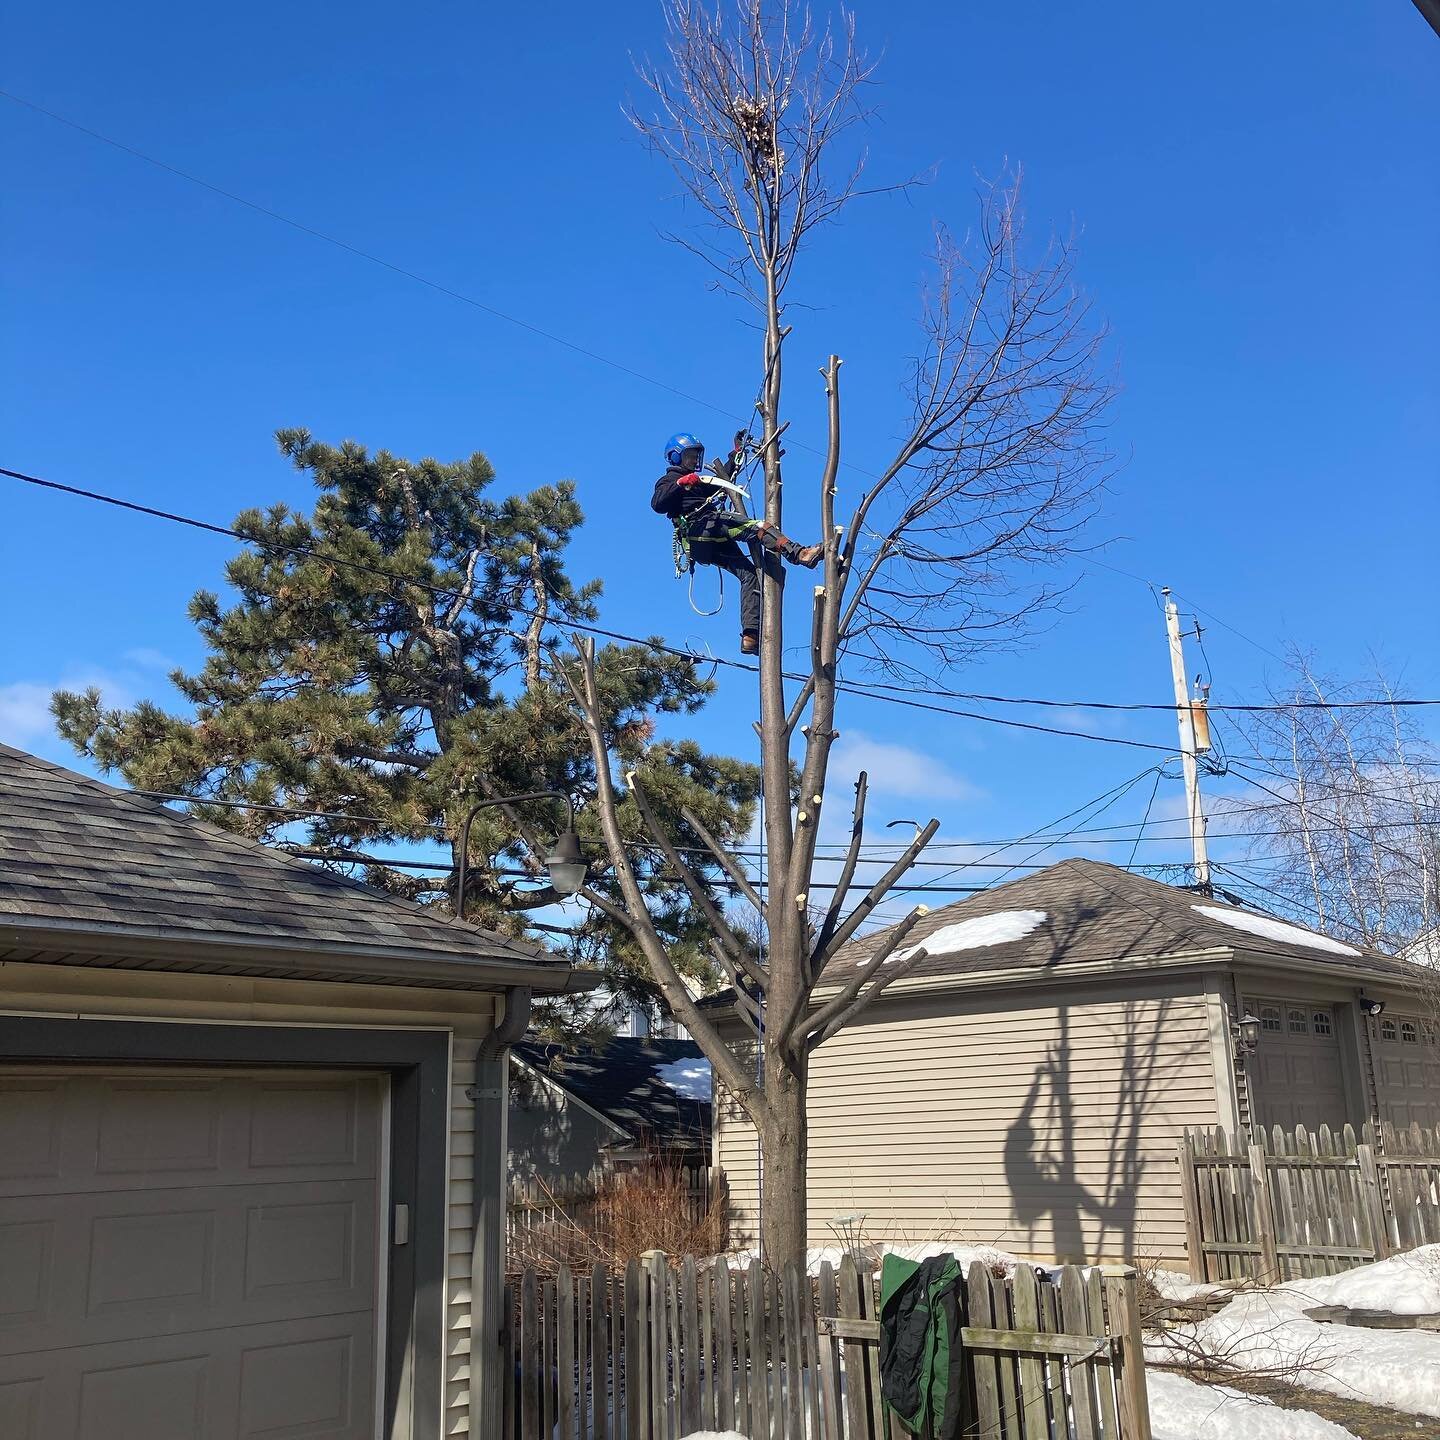 Just a little more roof clearance on the garage and that prune is done. First day back out, we definitely checked over everything twice including making sure this work order was a removal! #treework #arblife #arborist #trees #tree